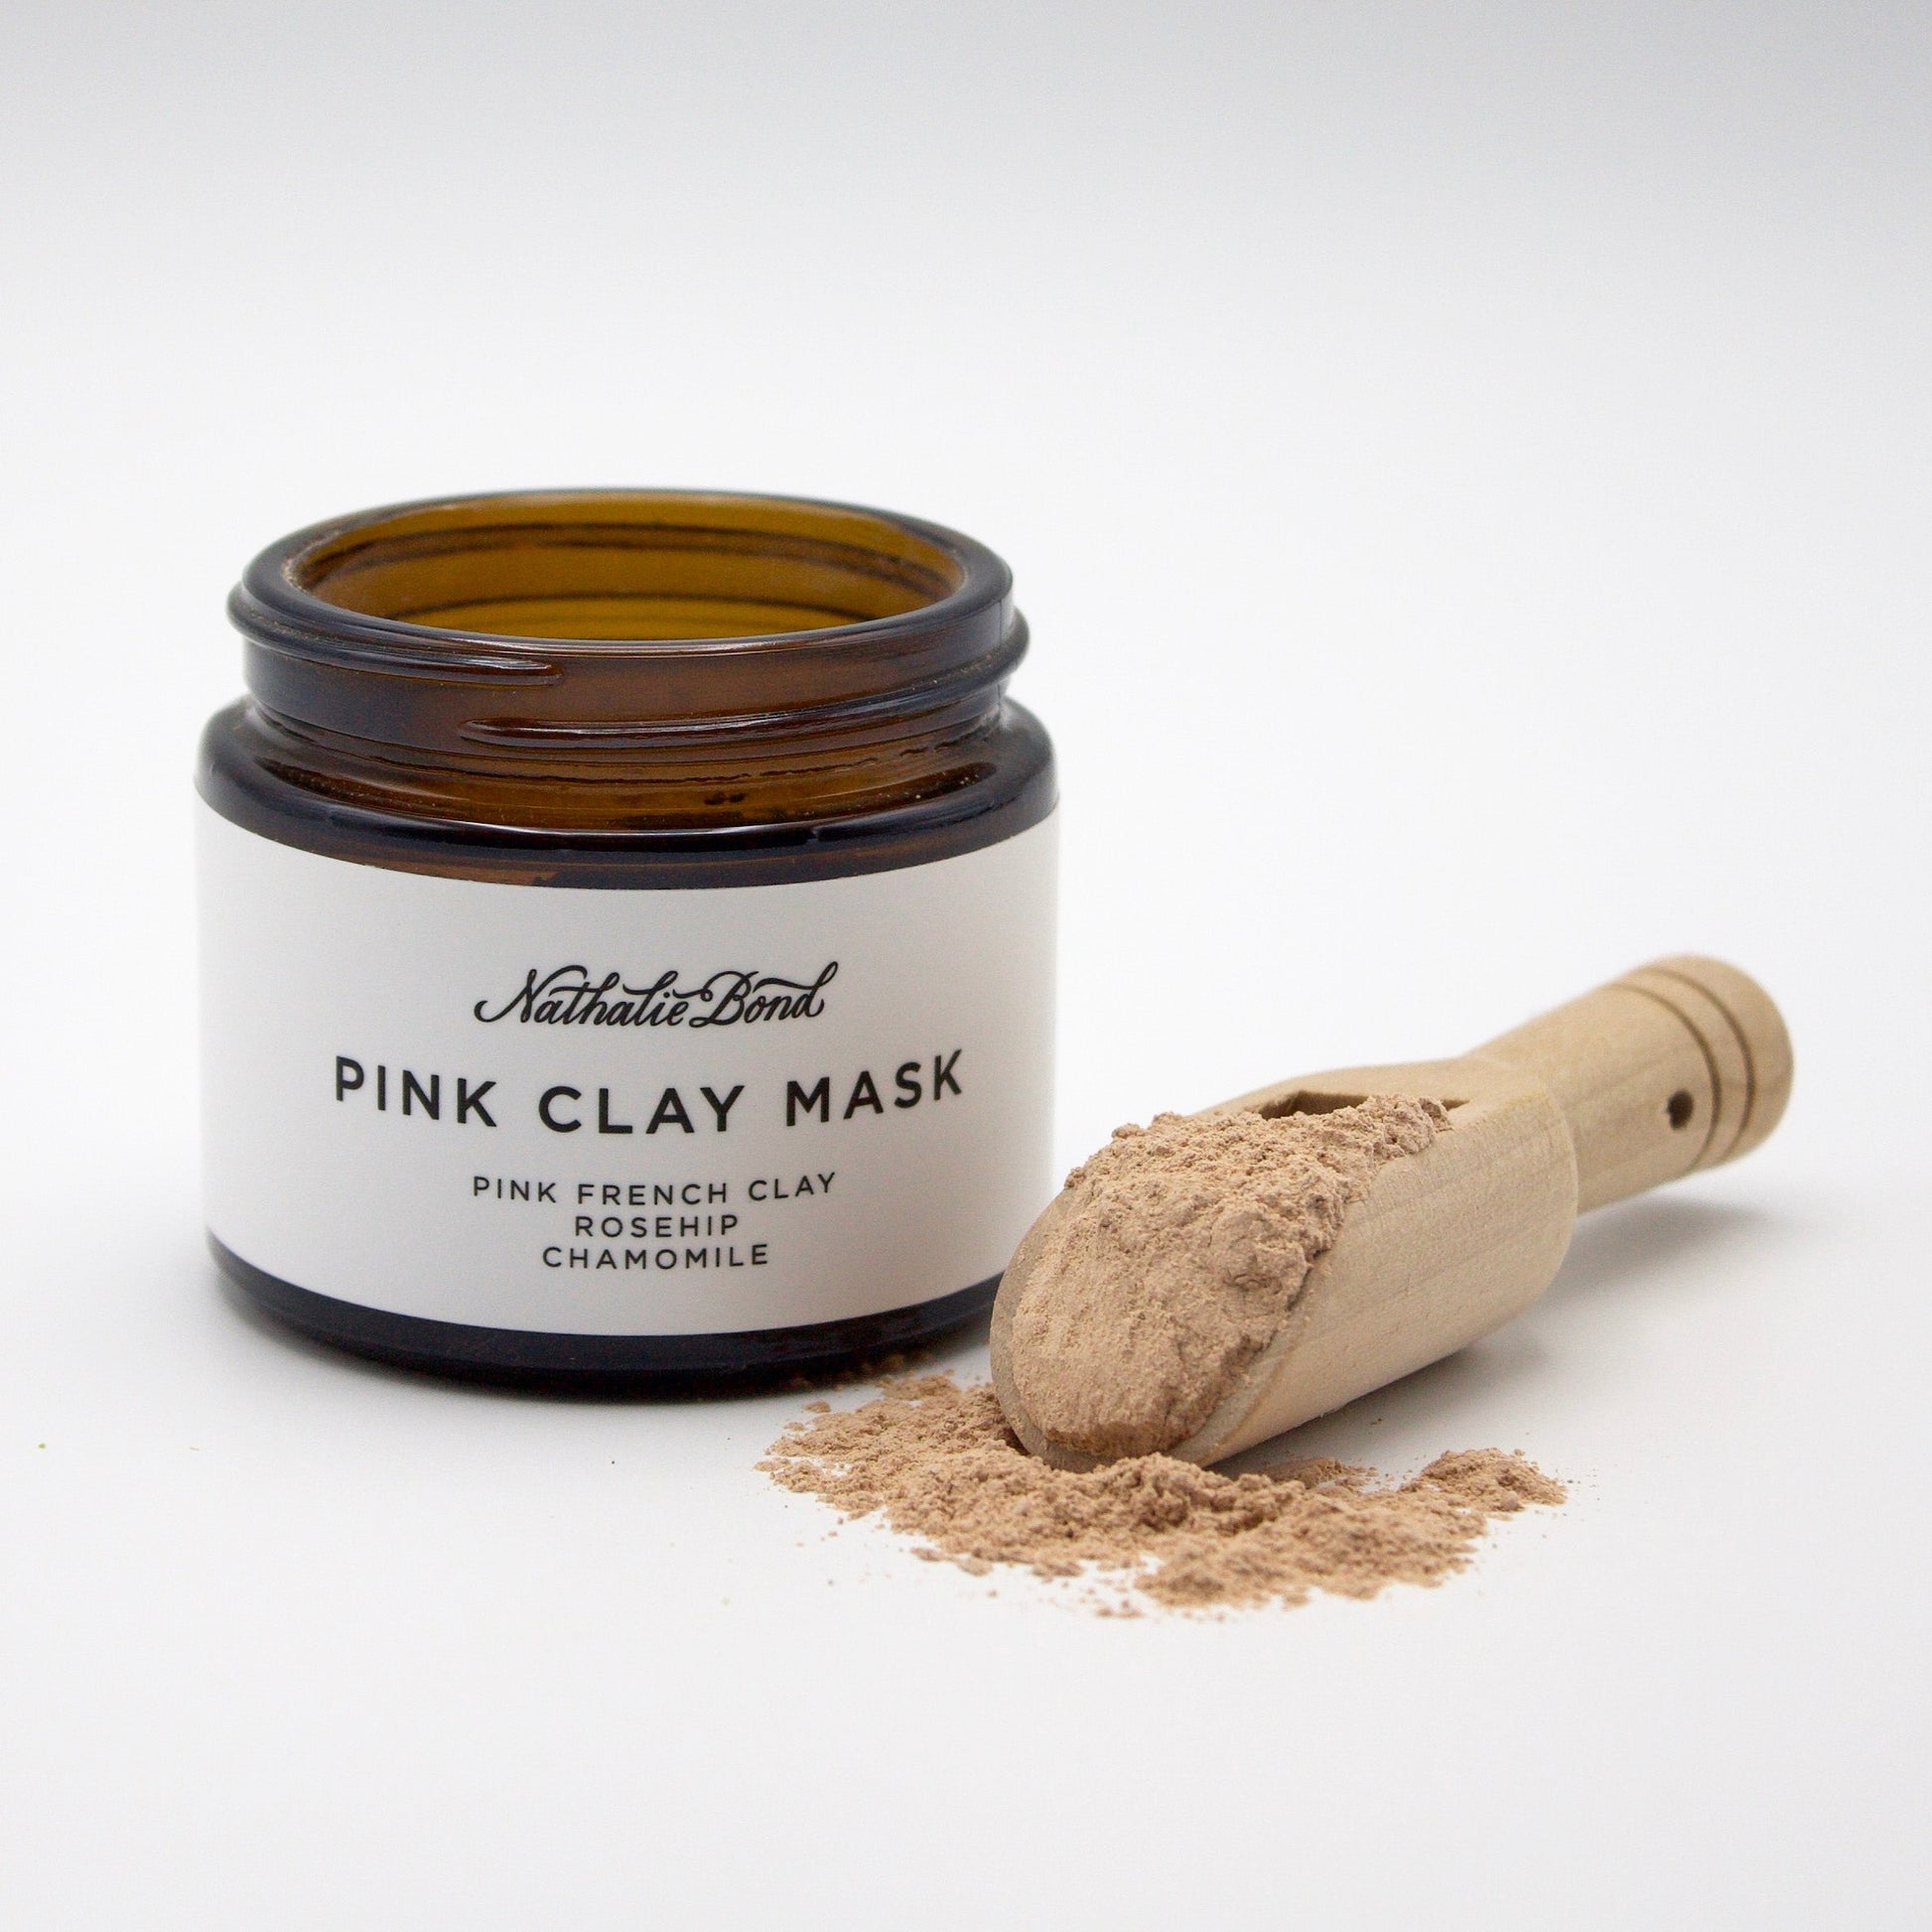 Pink Clay Mask in a jar